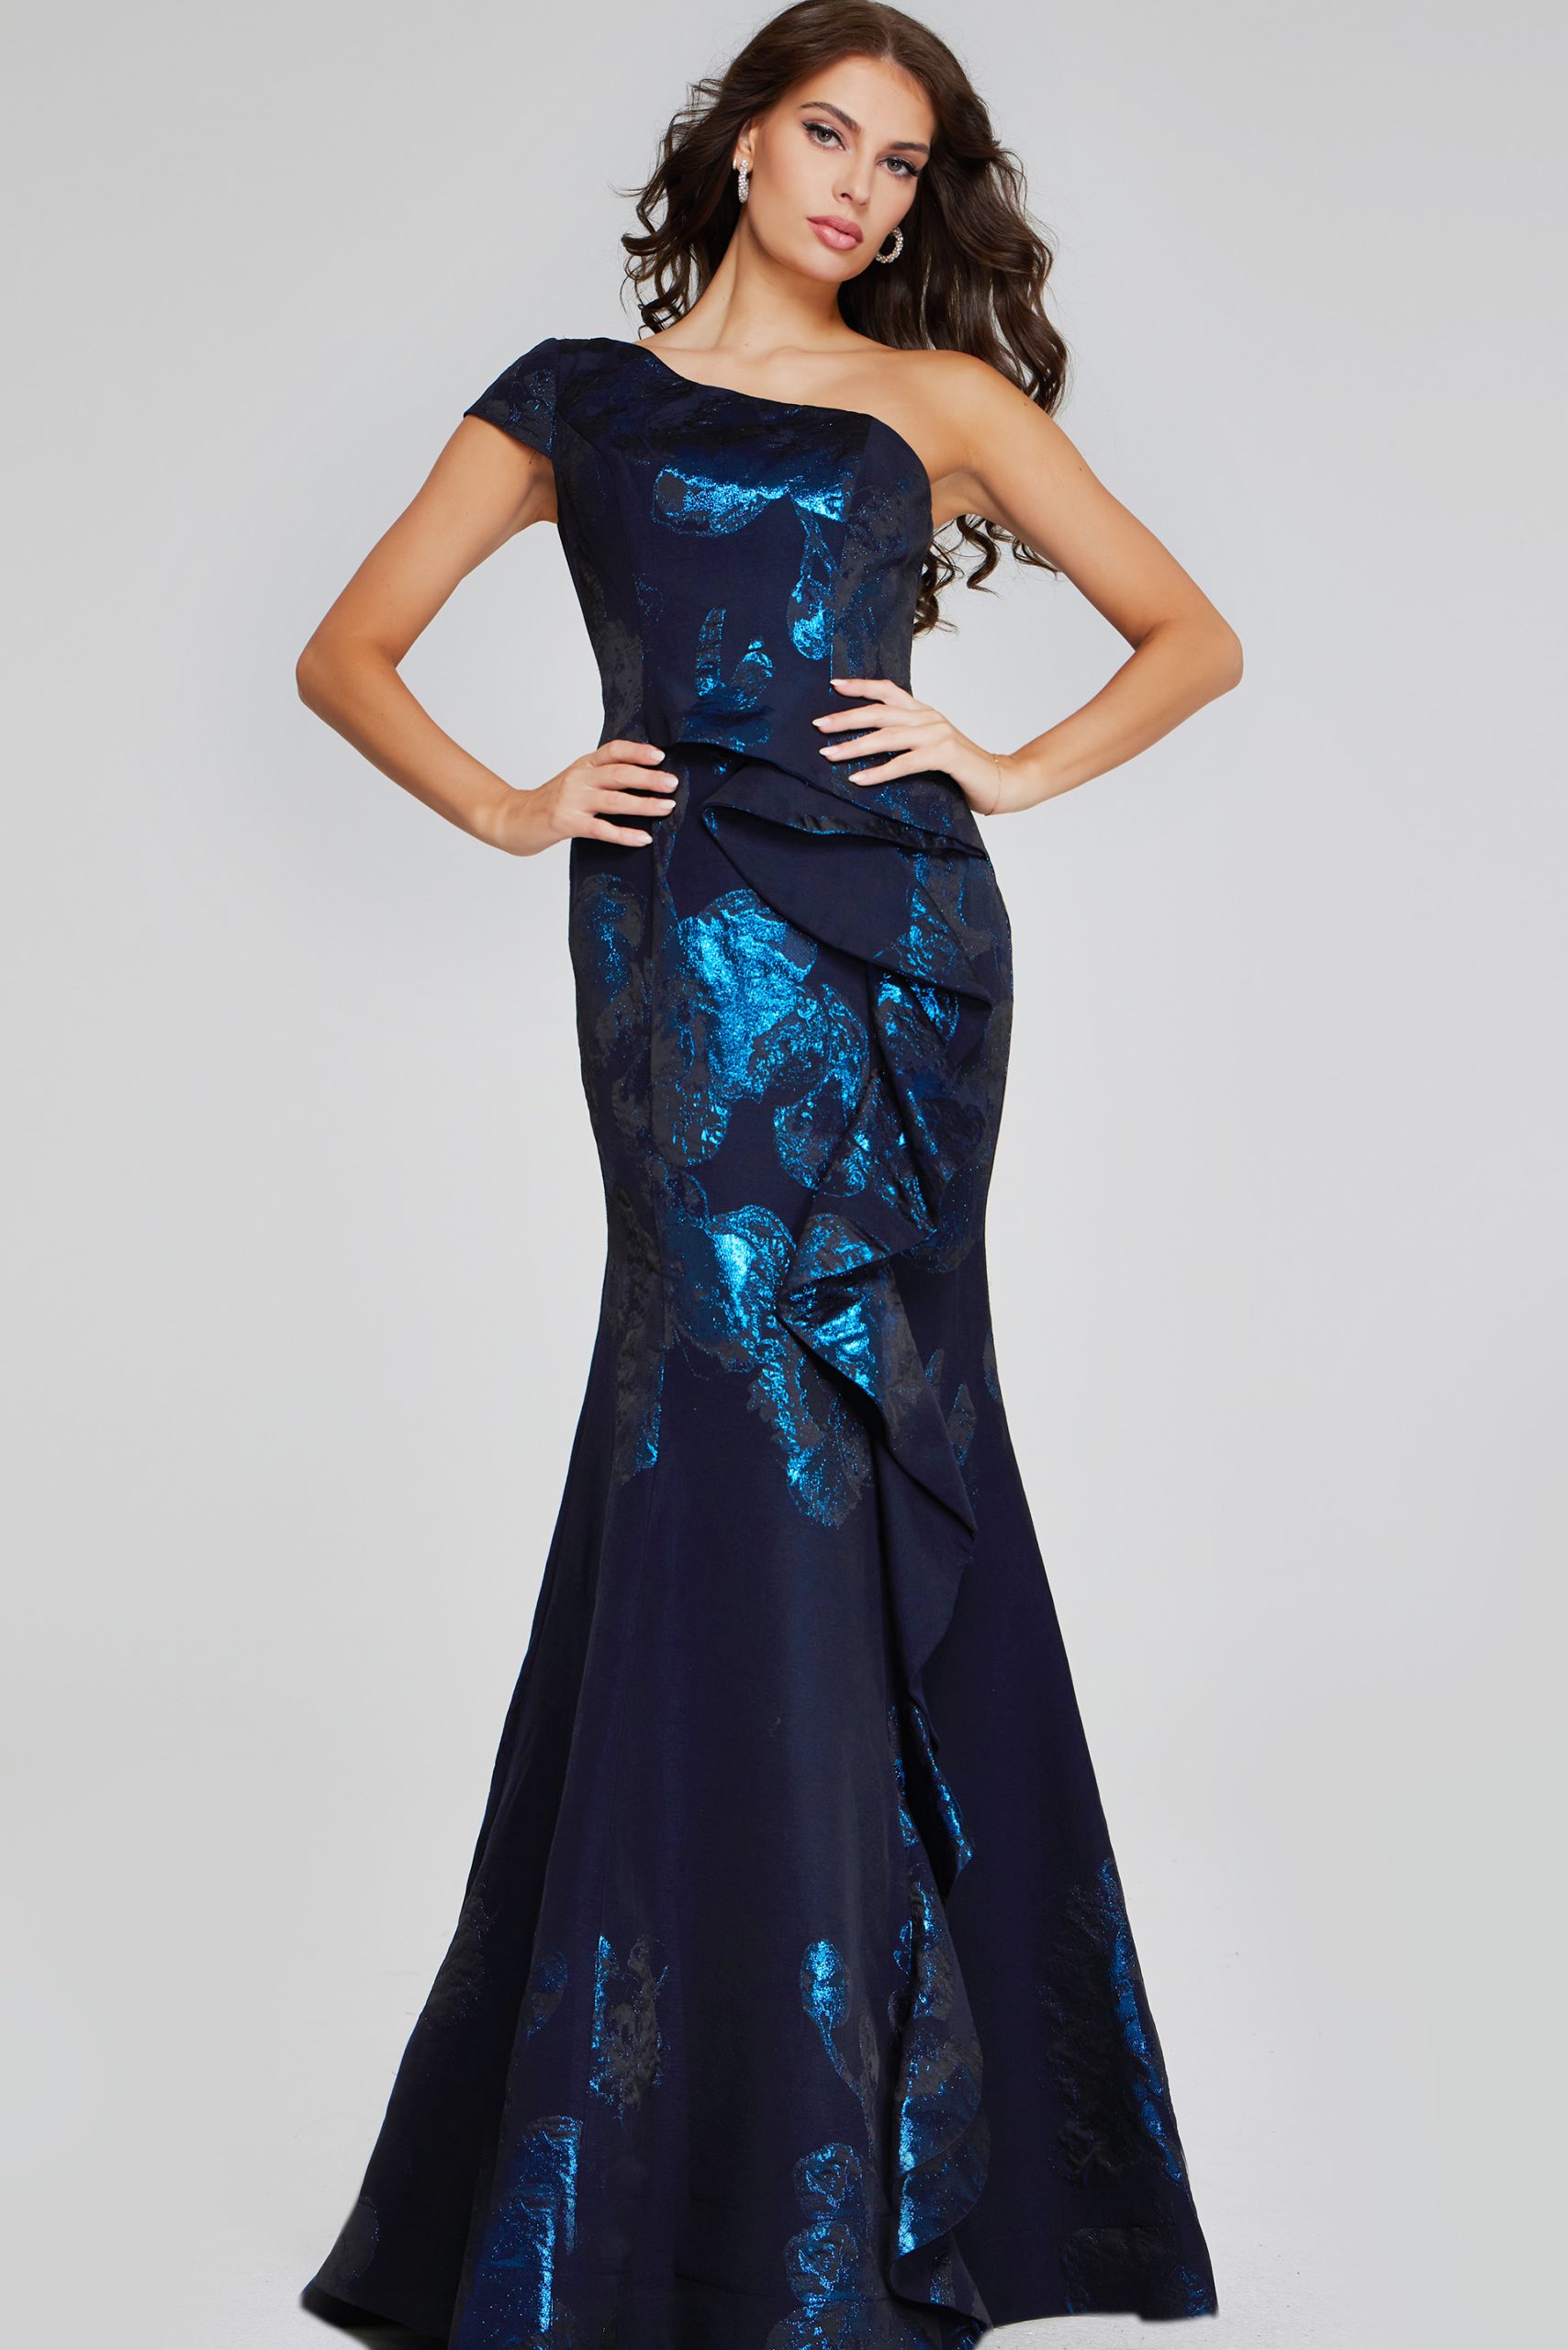 Elegant Navy One-Shoulder Gown with Metallic Accents 40320